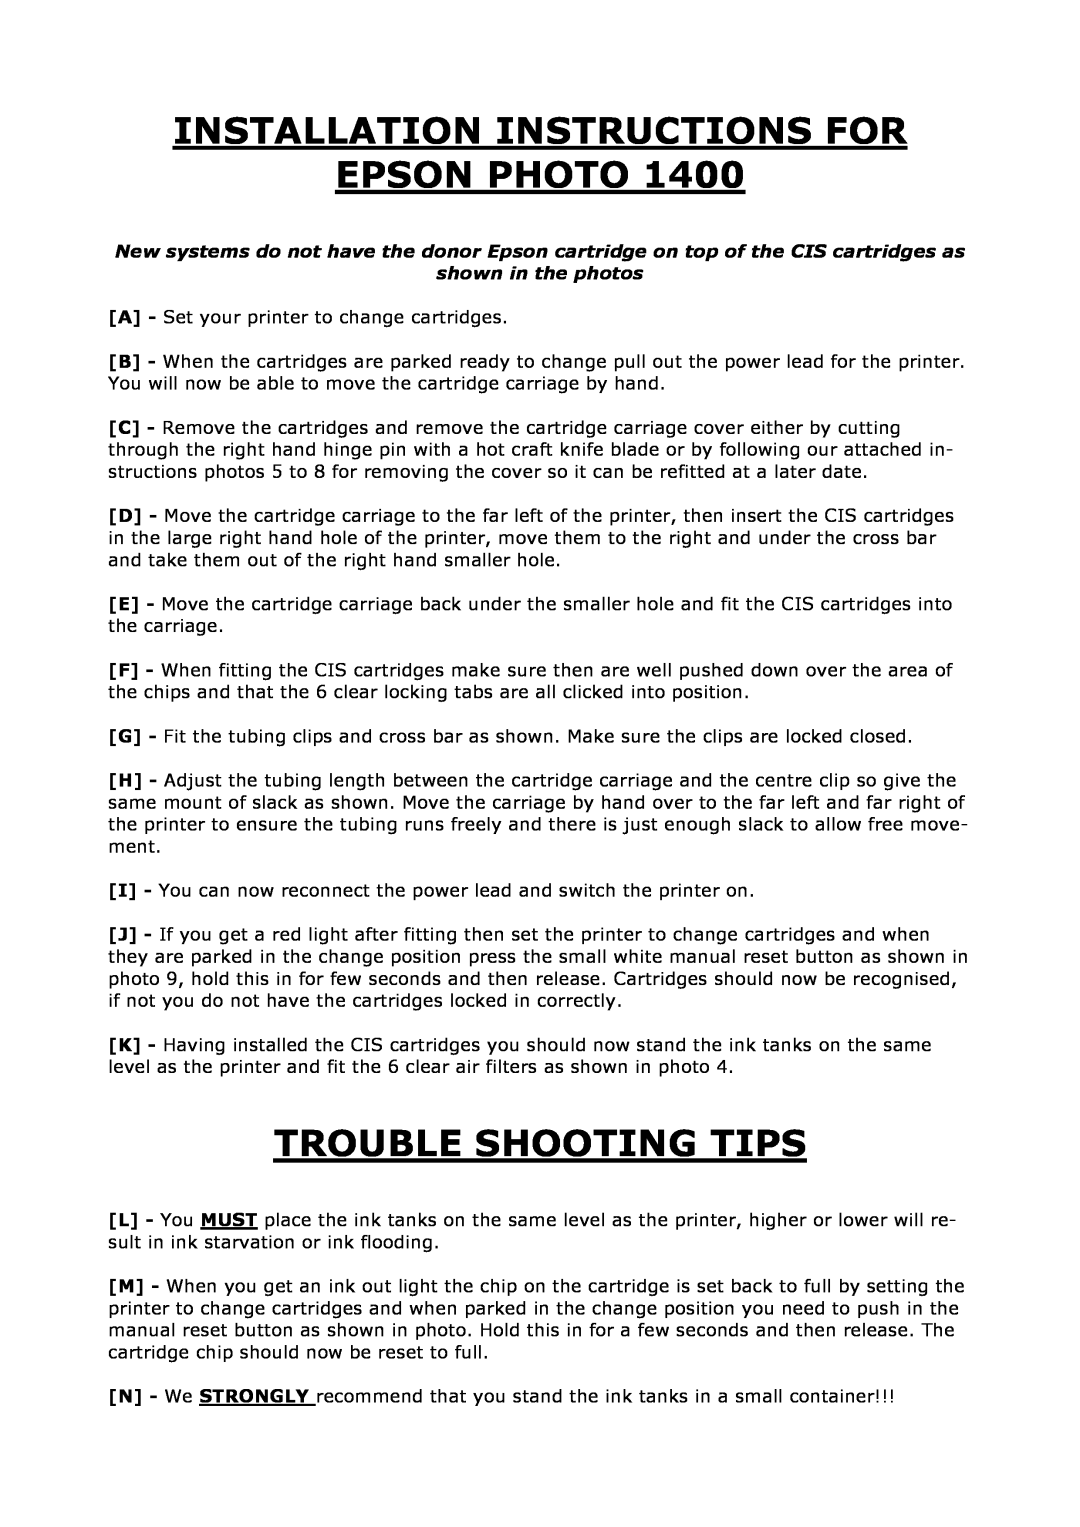 Epson 1400 installation instructions Installation Instructions For Epson Photo, Trouble Shooting Tips, shown in the photos 